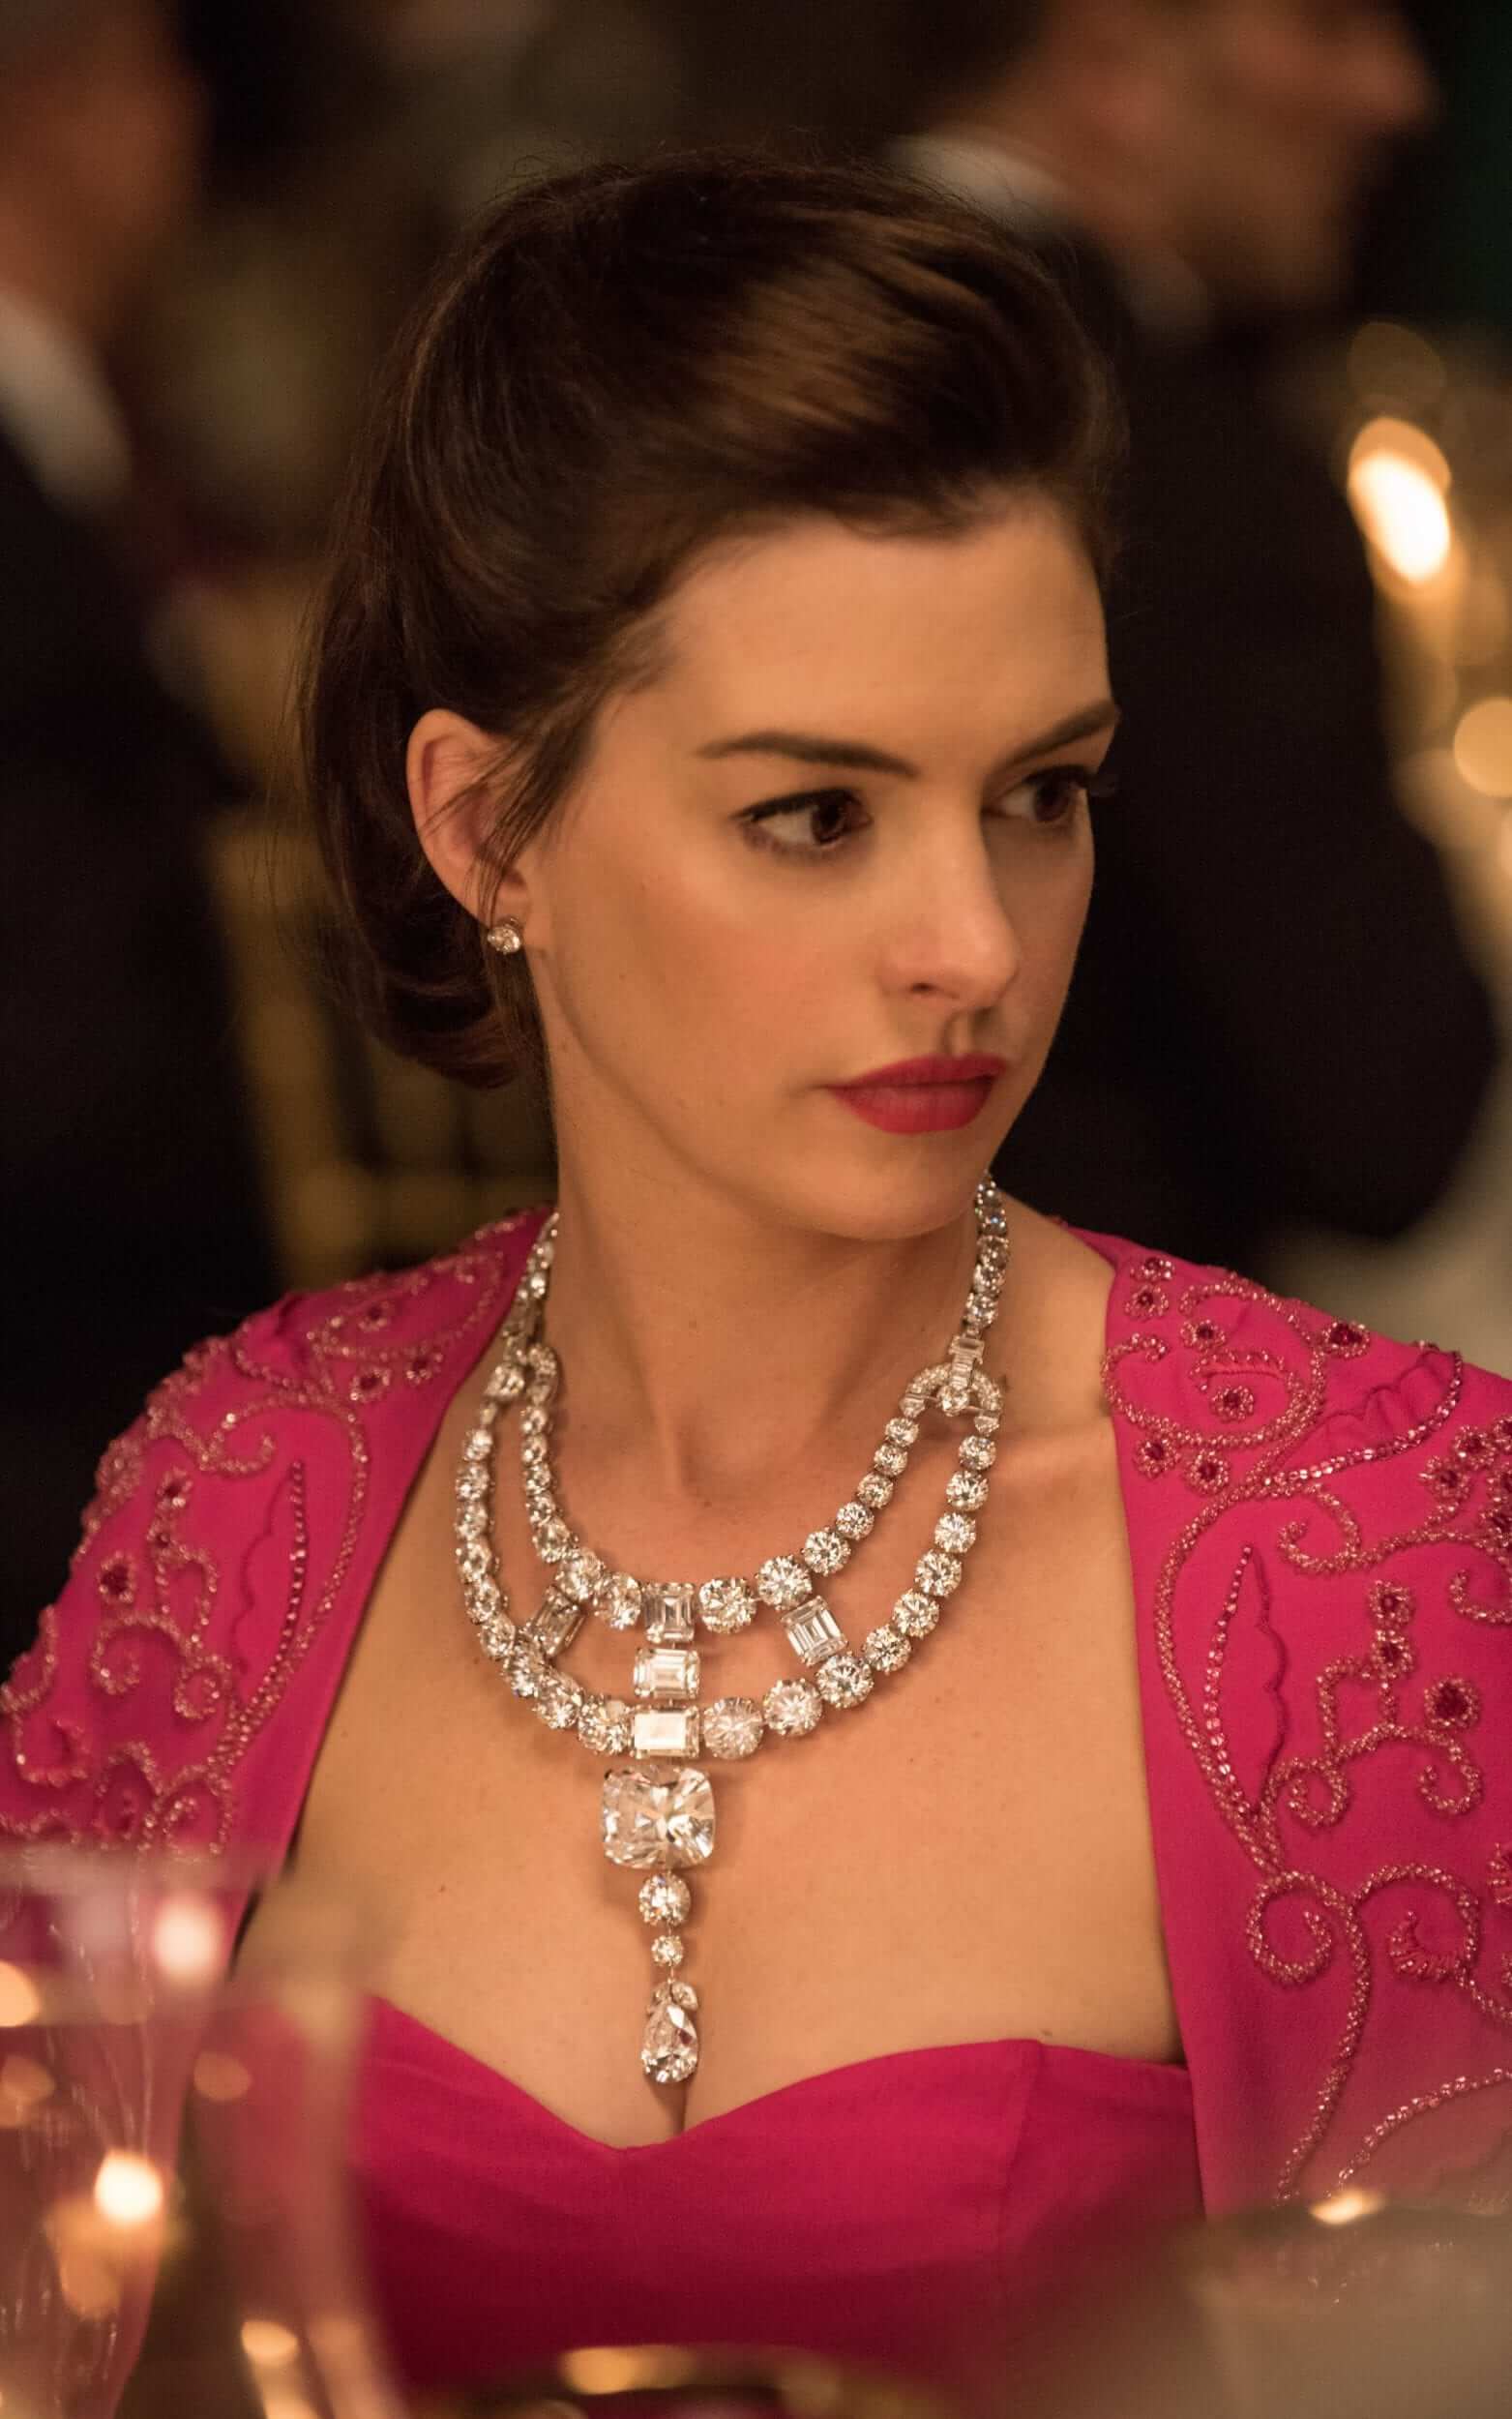 Actress Anne Hathaway wearing the Jeanne Toussaint necklace in Ocean's 8 featuring dozens of round and cushion cut diamonds which was reimagined from a historic diamond Cartier necklace